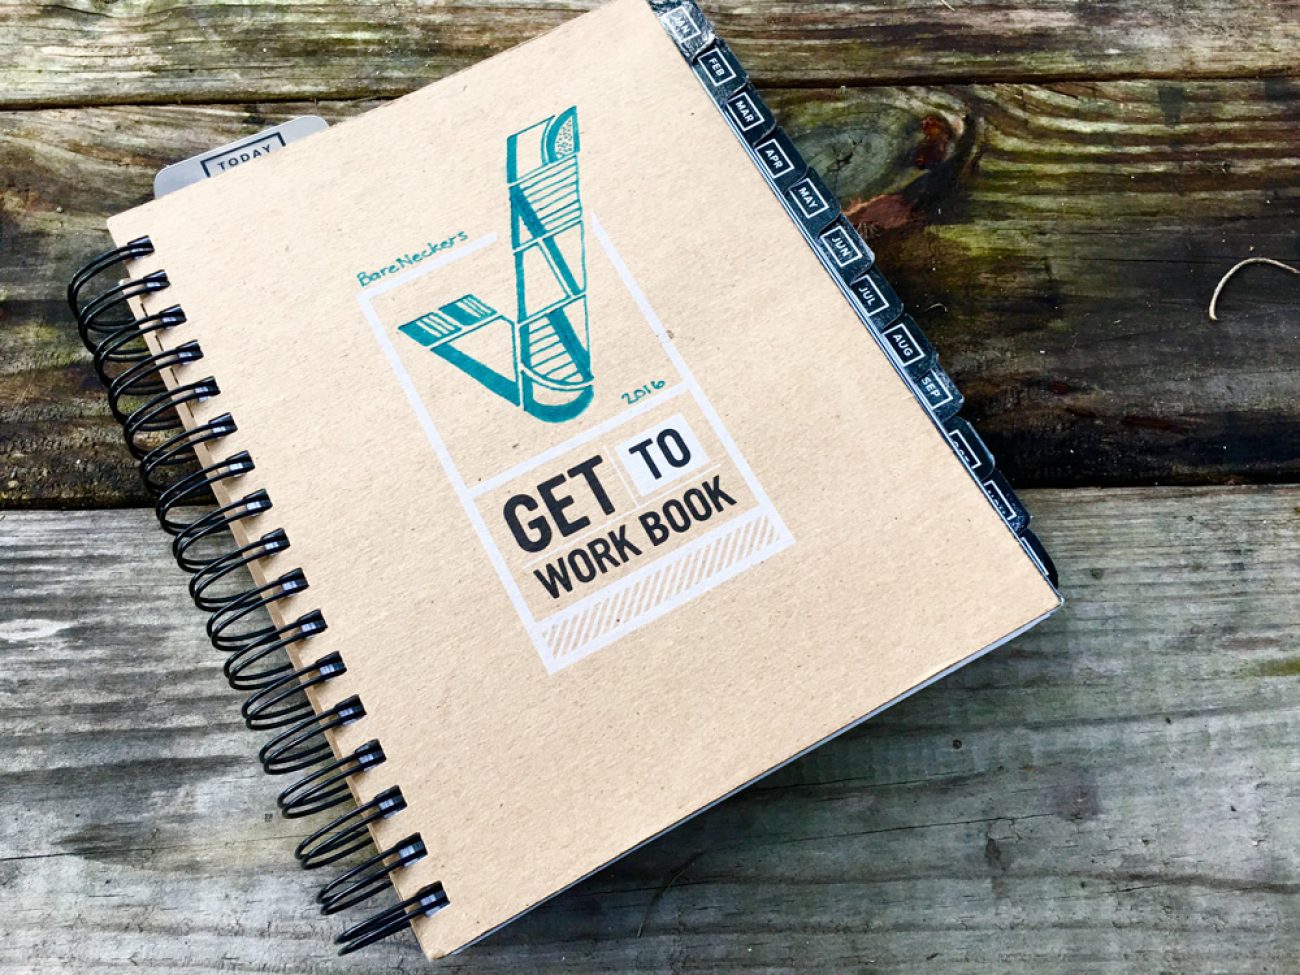 Get To Work Book